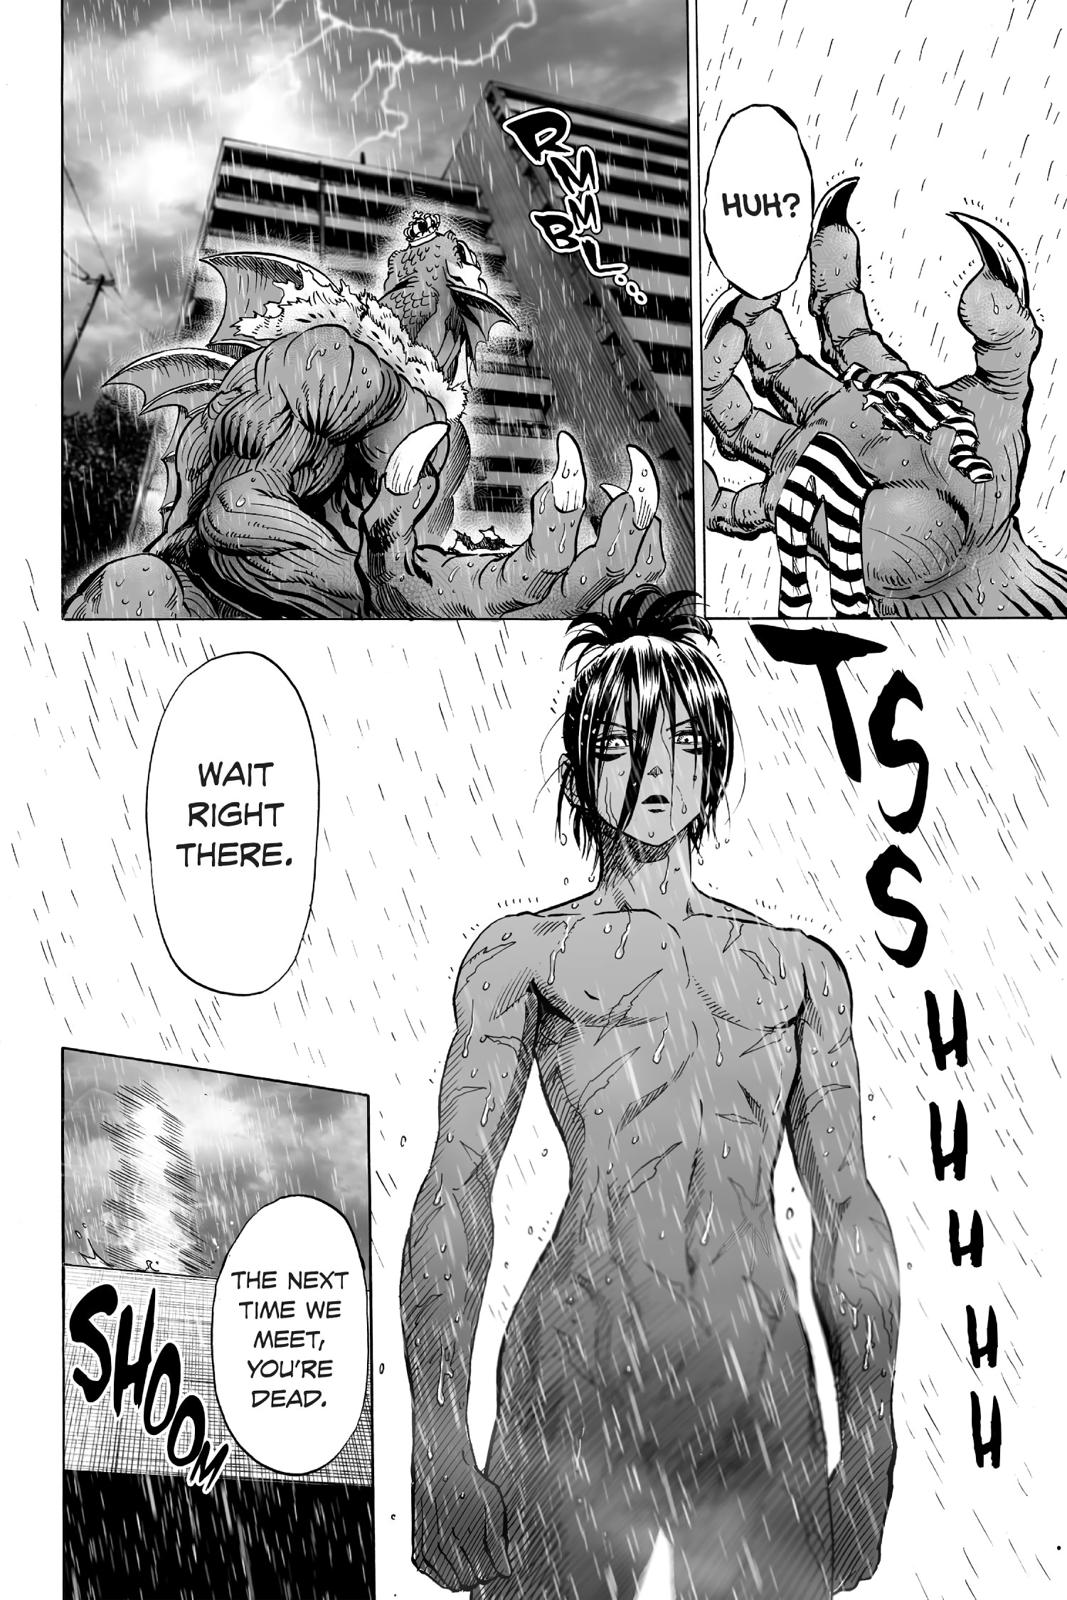 One-Punch Man, Punch 25 image 52